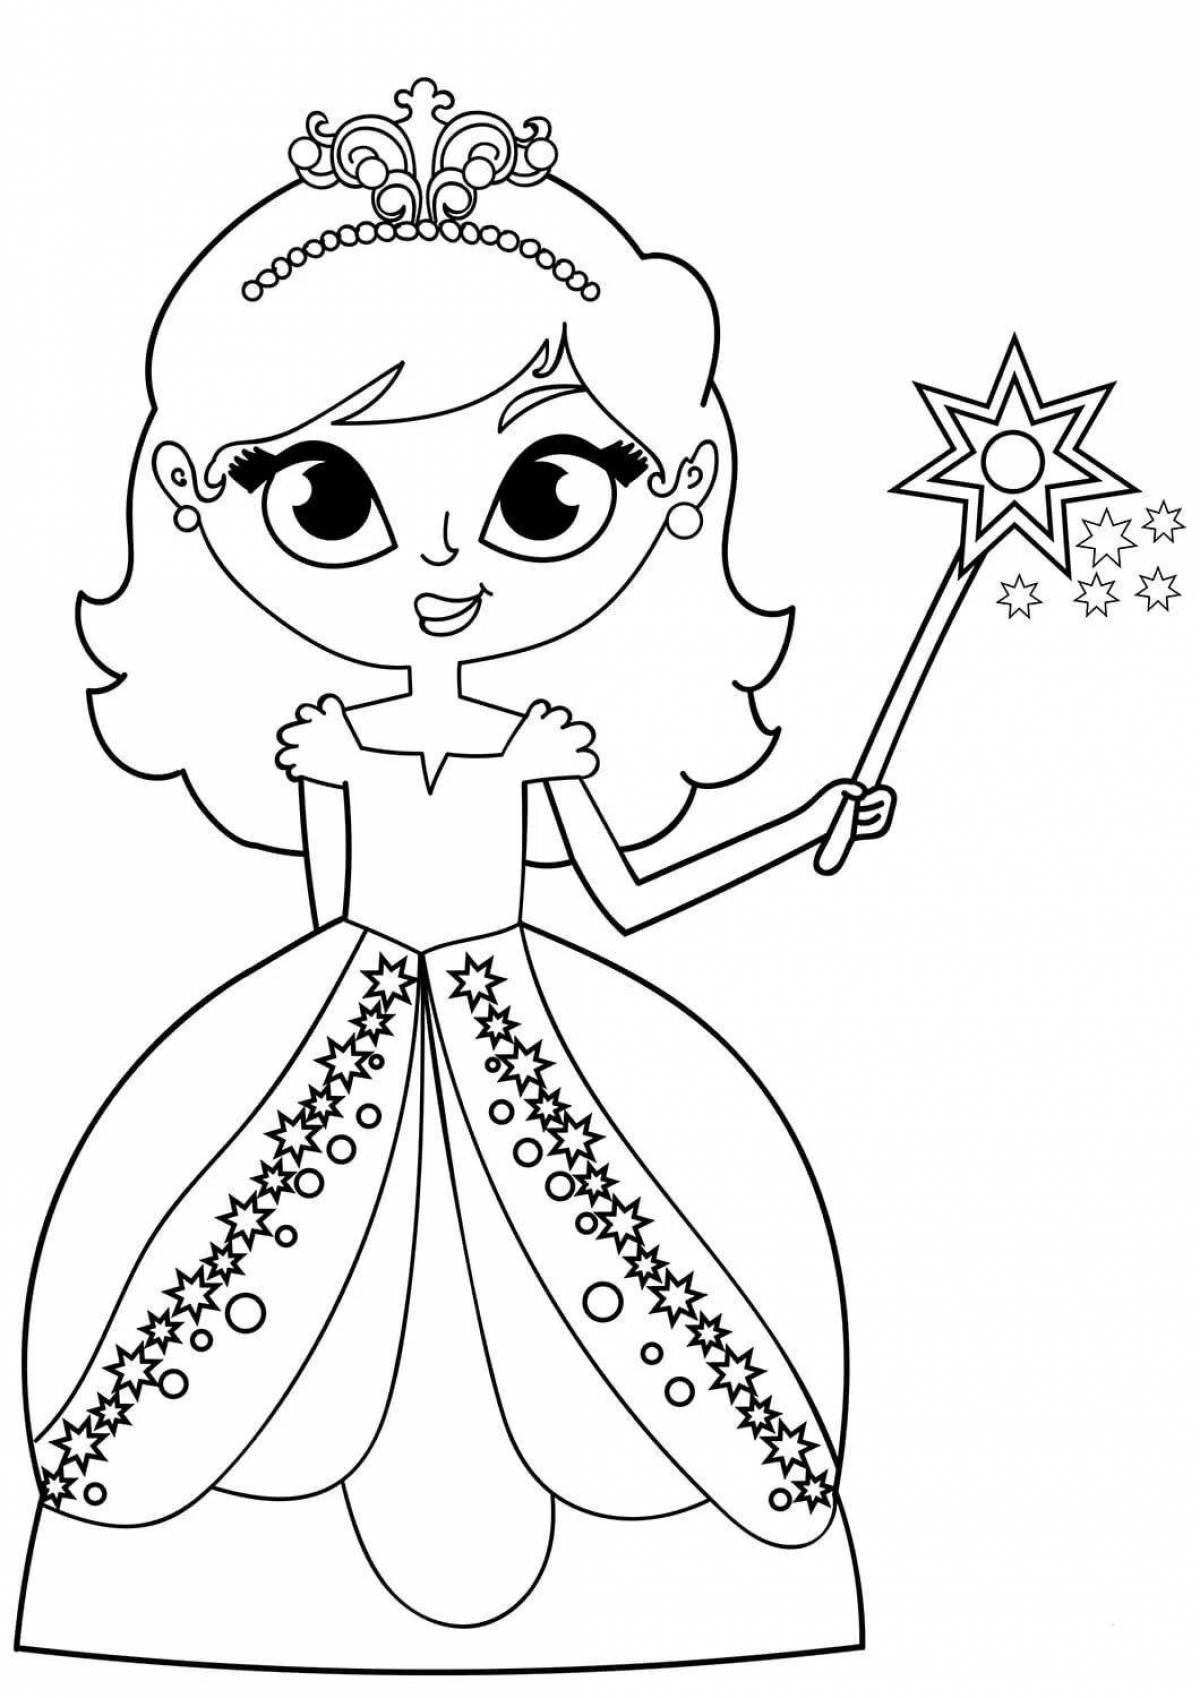 Exotic coloring book for girls princess 3-4 years old